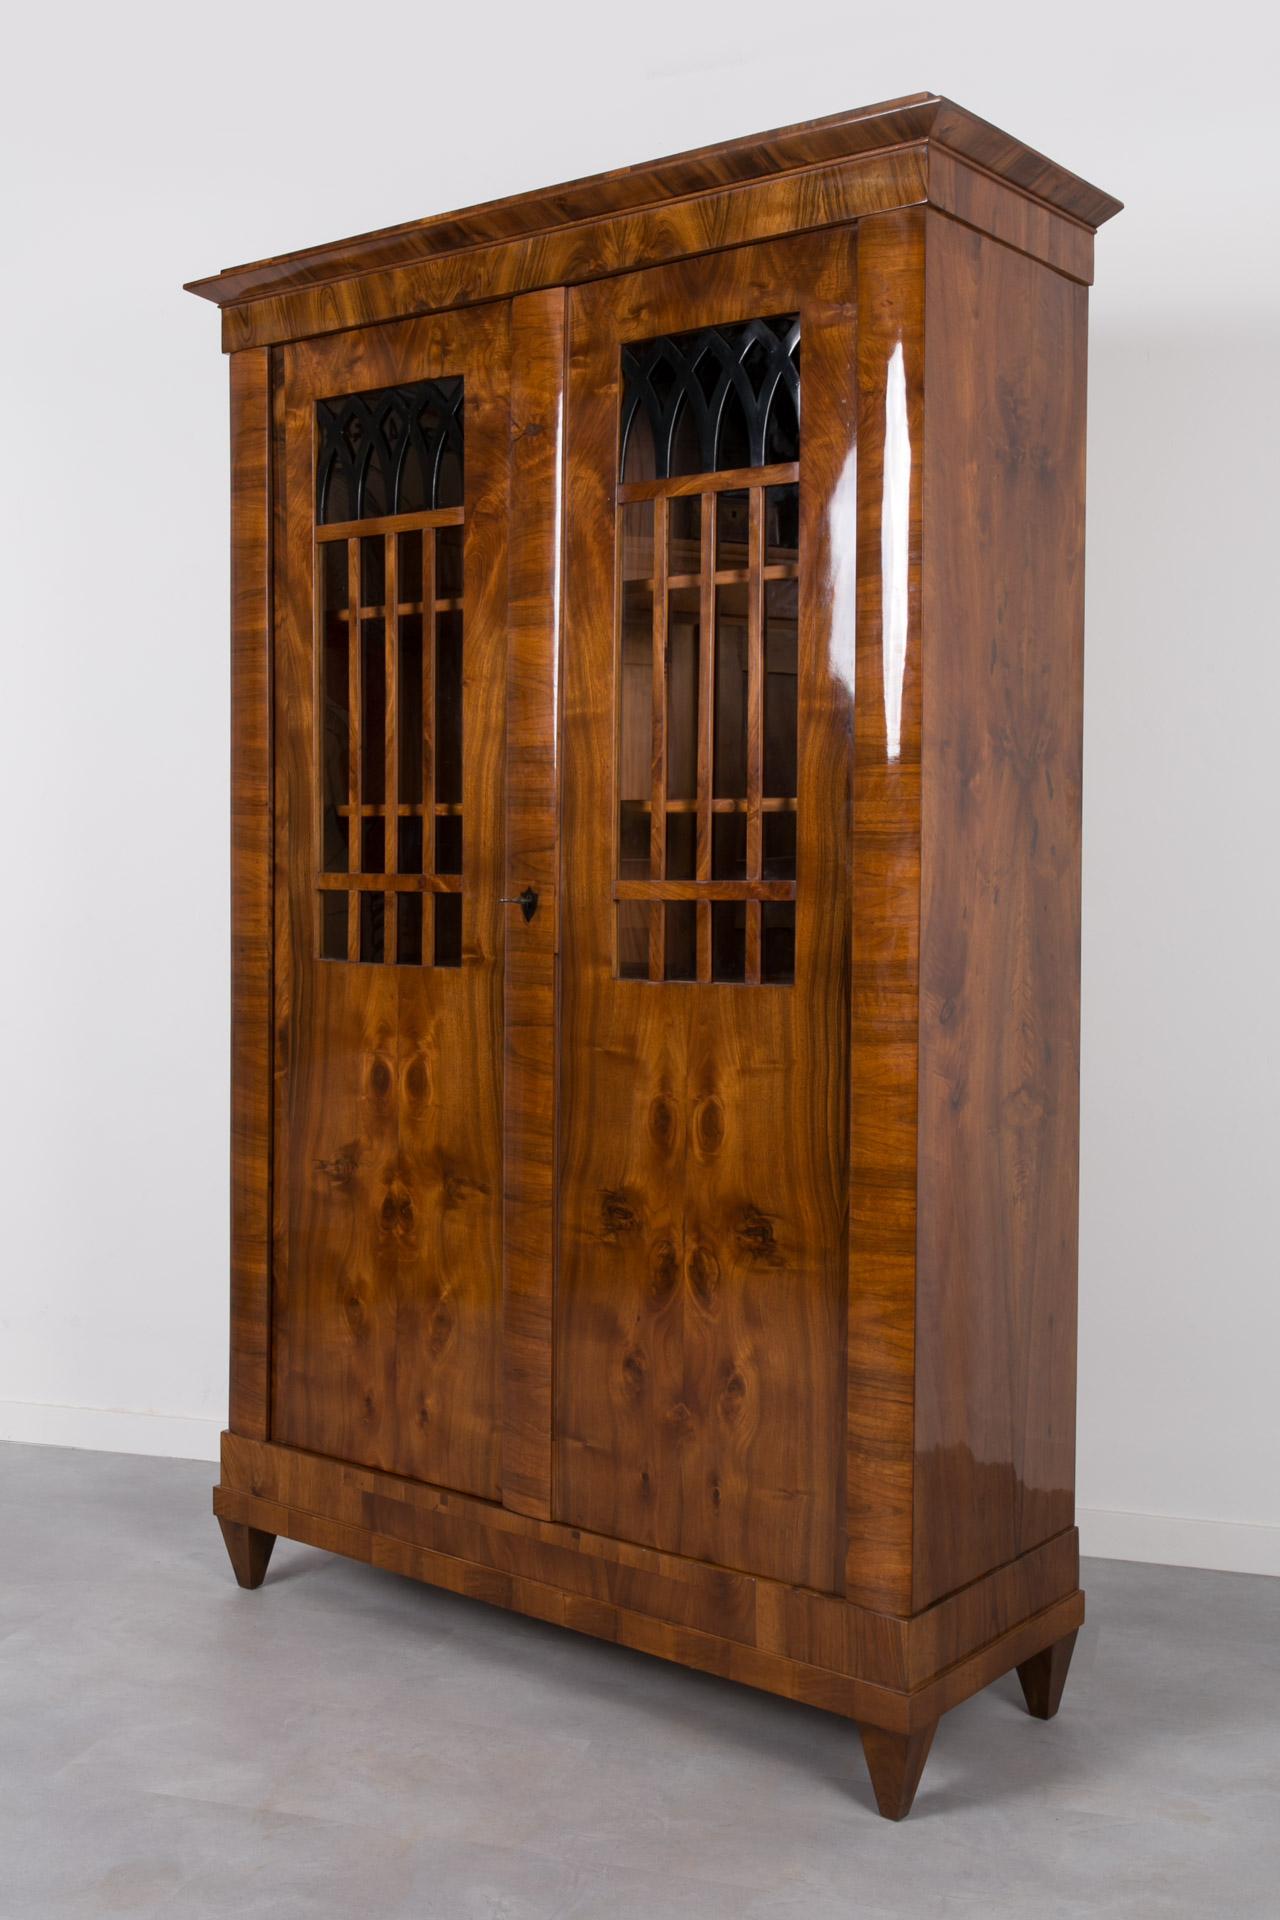 This Biedermeier vitrine comes from Germany and was made in 19th century. The piece is made of pine wood veneered with beautiful walnut. It is after professional renovation and is in very good condition. The surface is finished with shellac polish,